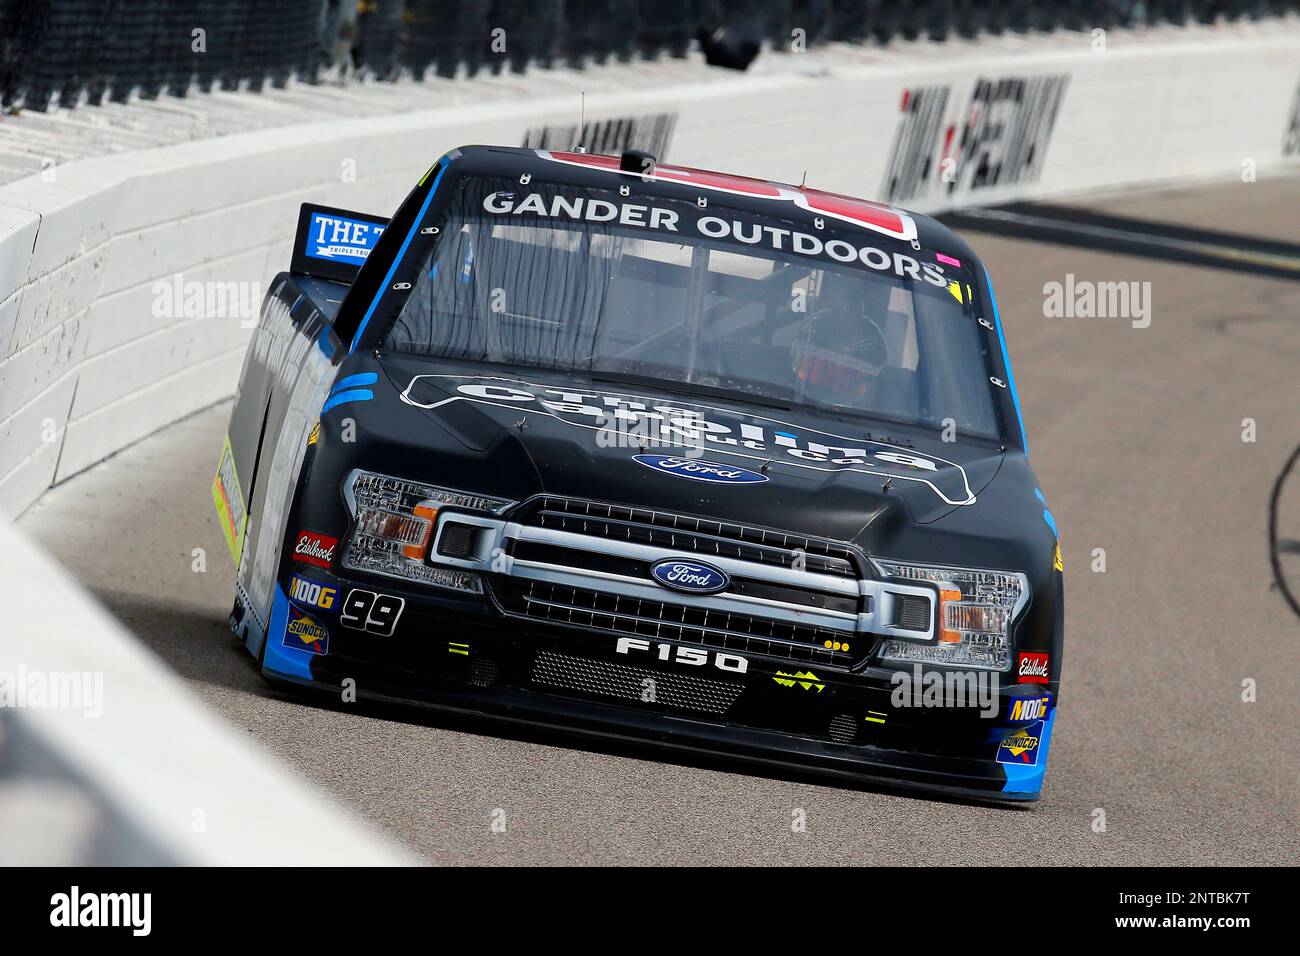 #99: Ben Rhodes, ThorSport Racing, Ford F-150 during practice for the NASCAR Gander Outdoor Truck Series M&M's 200 race at Iowa Speedway, Saturday, June 15, 2019, in Newton, Iowa. (AP Photo/NKP, Russell LaBounty) MANDATORY CREDIT Stockfoto